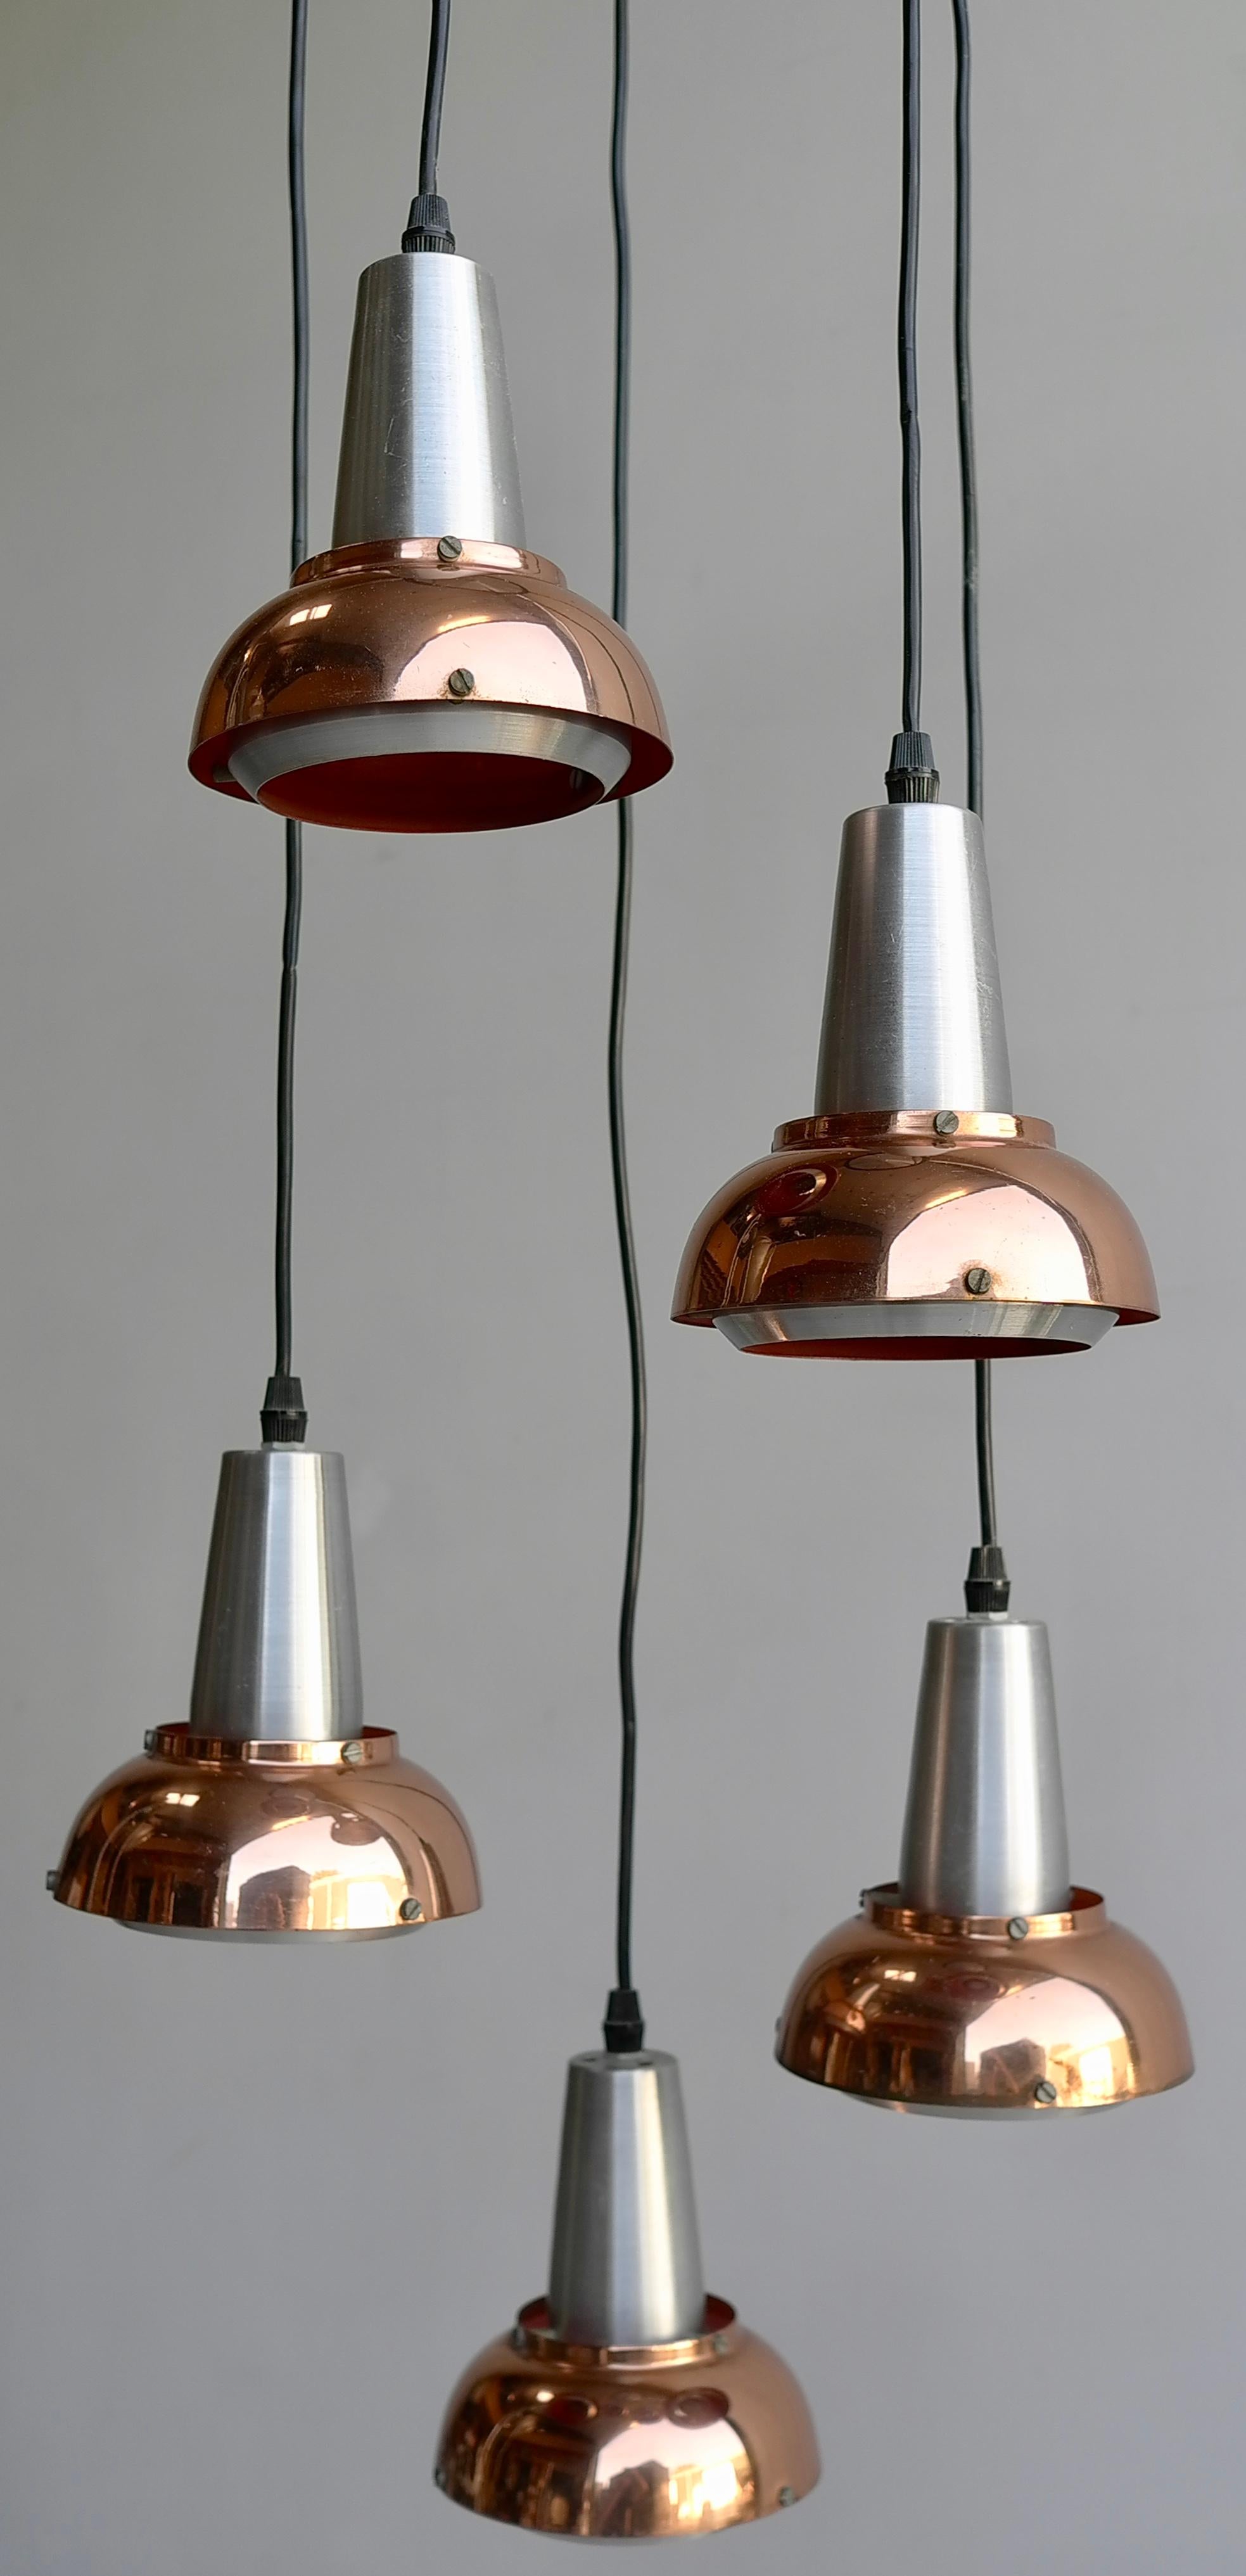 Copper and aluminium Fog & Morup 1960s chandelier. Each shade can be hung at a different height and level. Red colored inside each shade, it gives a warm light when lit.

Measures: Adjustable in height 110cm up to 150cm in total. Each shade is